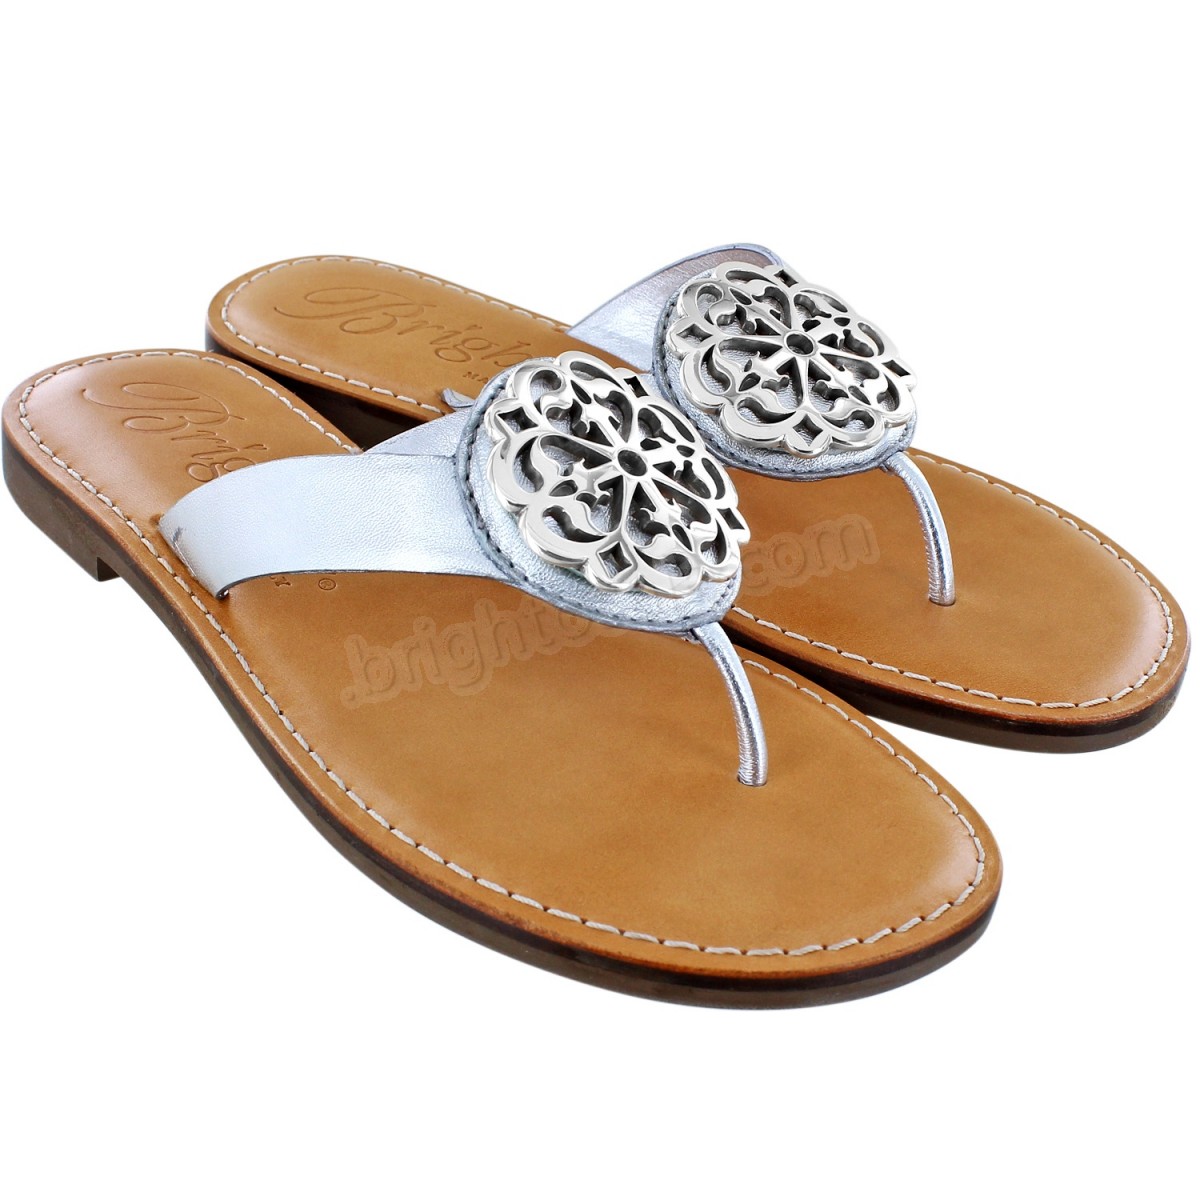 Brighton Collectibles & Online Discount Twine Woven Sandals - -16